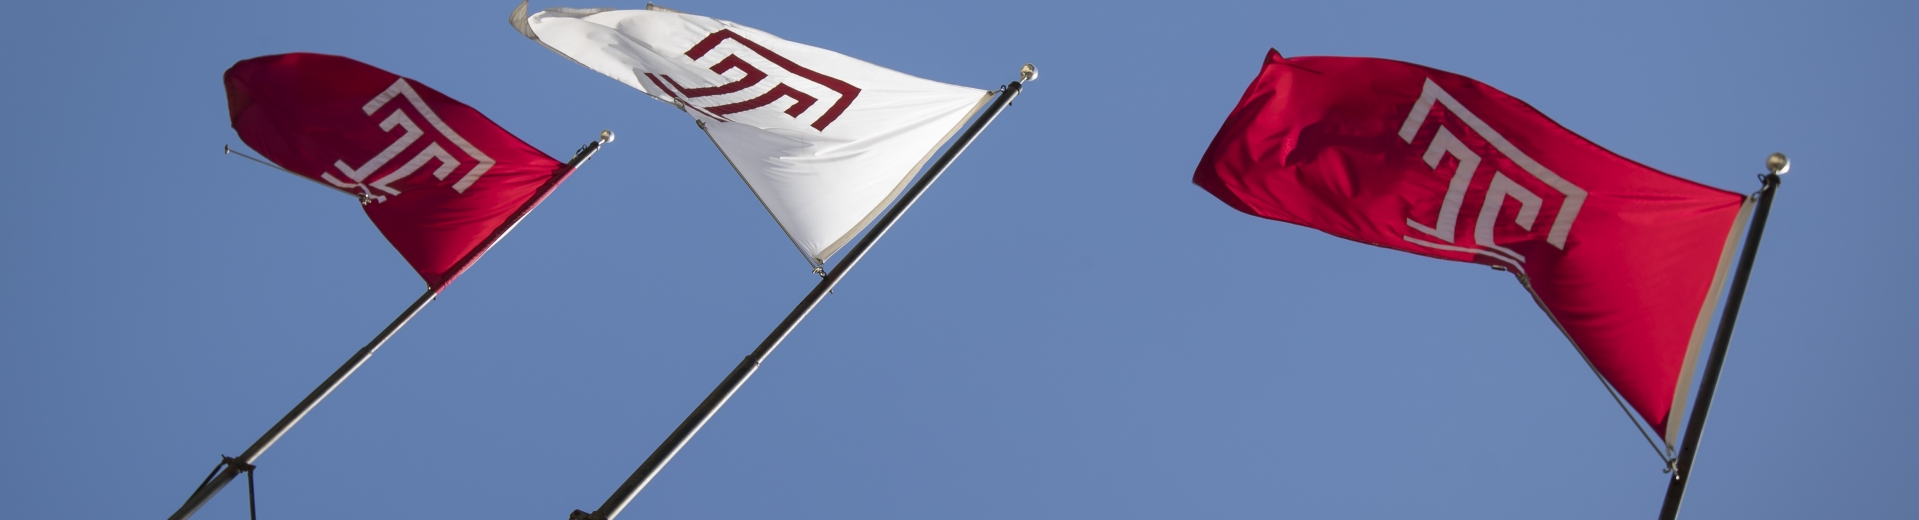 Picture of Temple flags waving in the wind 